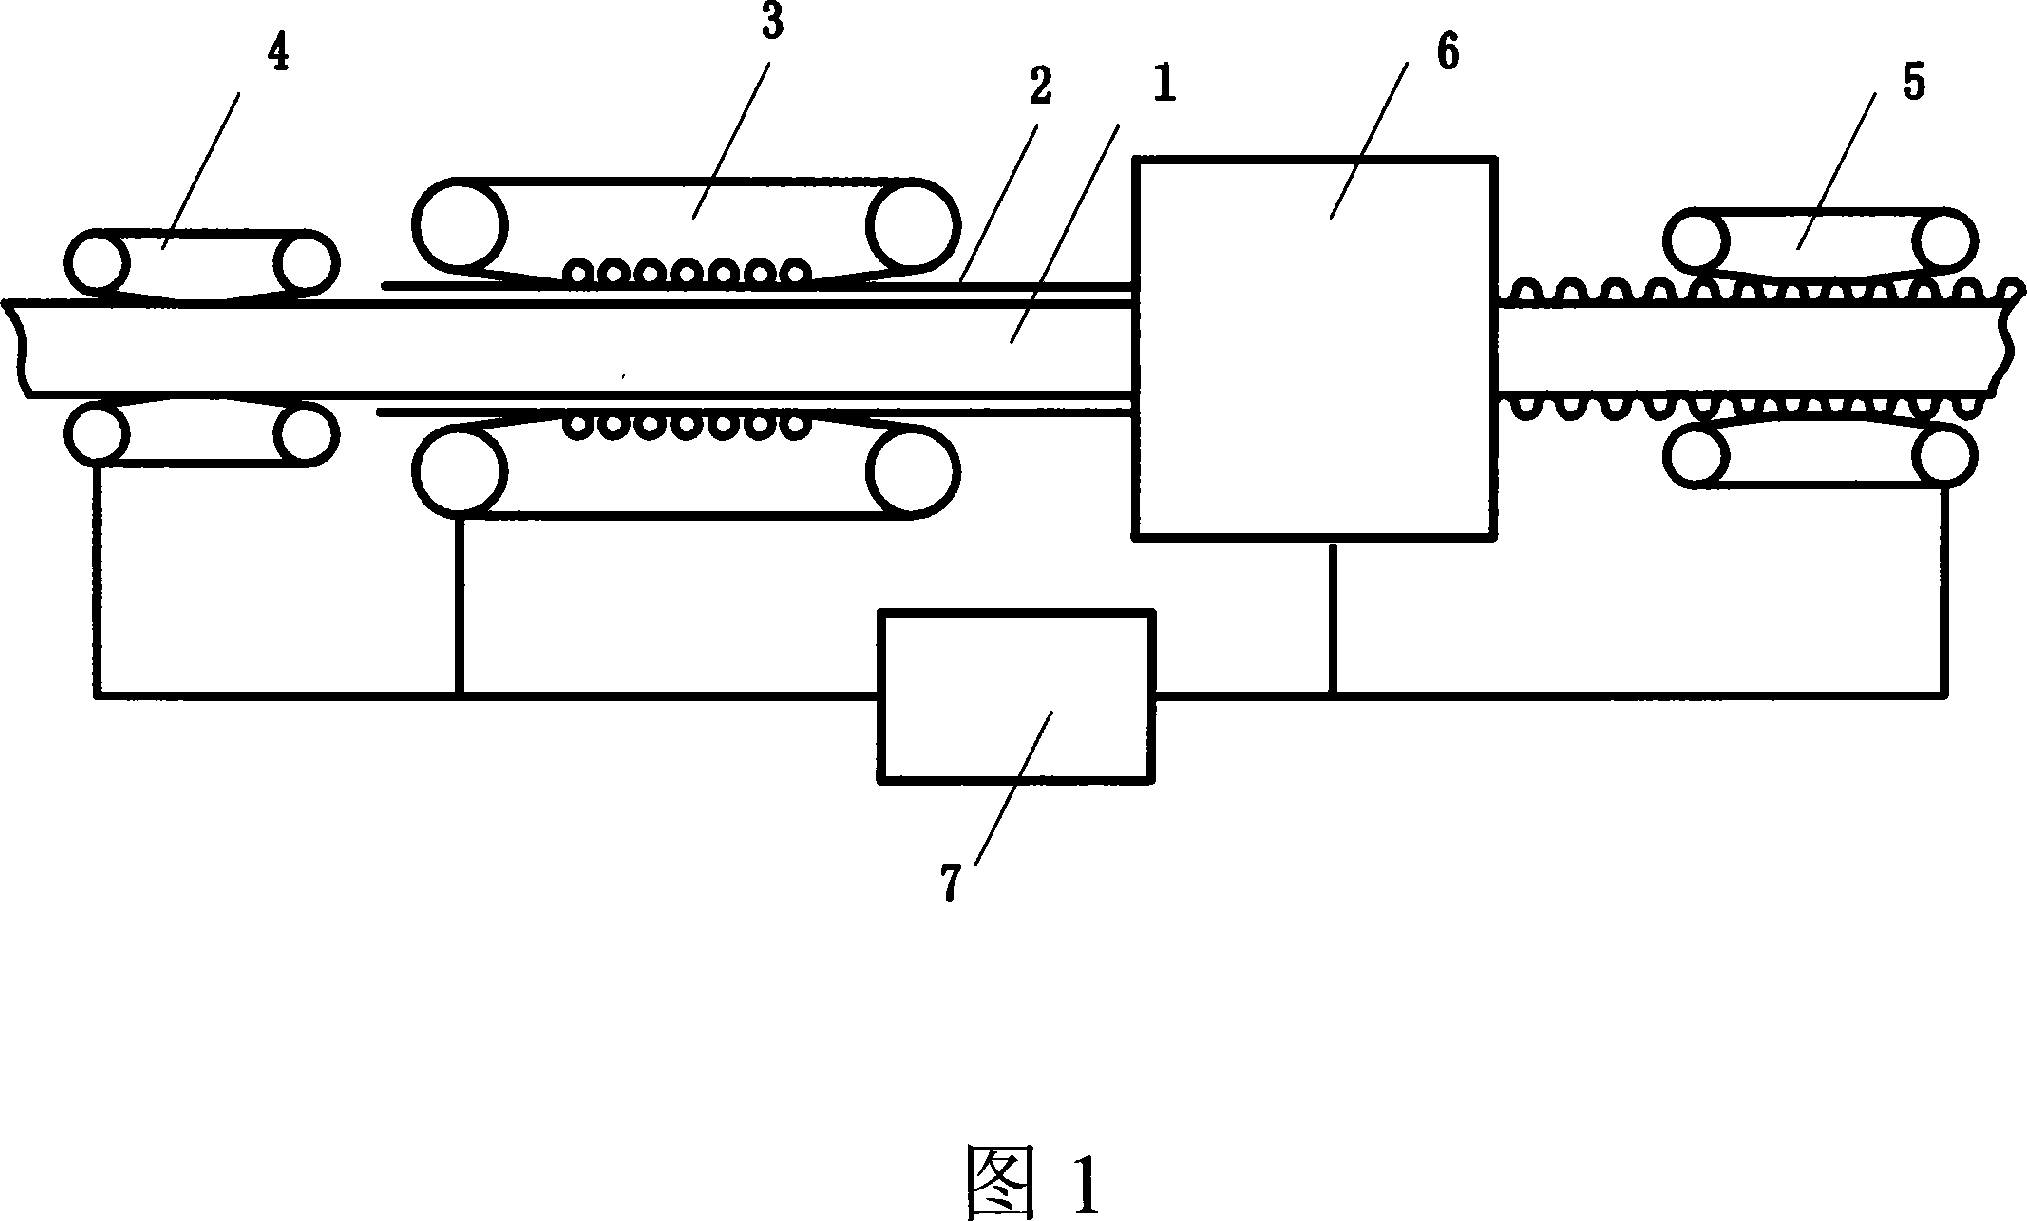 Metal wrinkled external conductor forming device of radio-frequency telecommunication cable